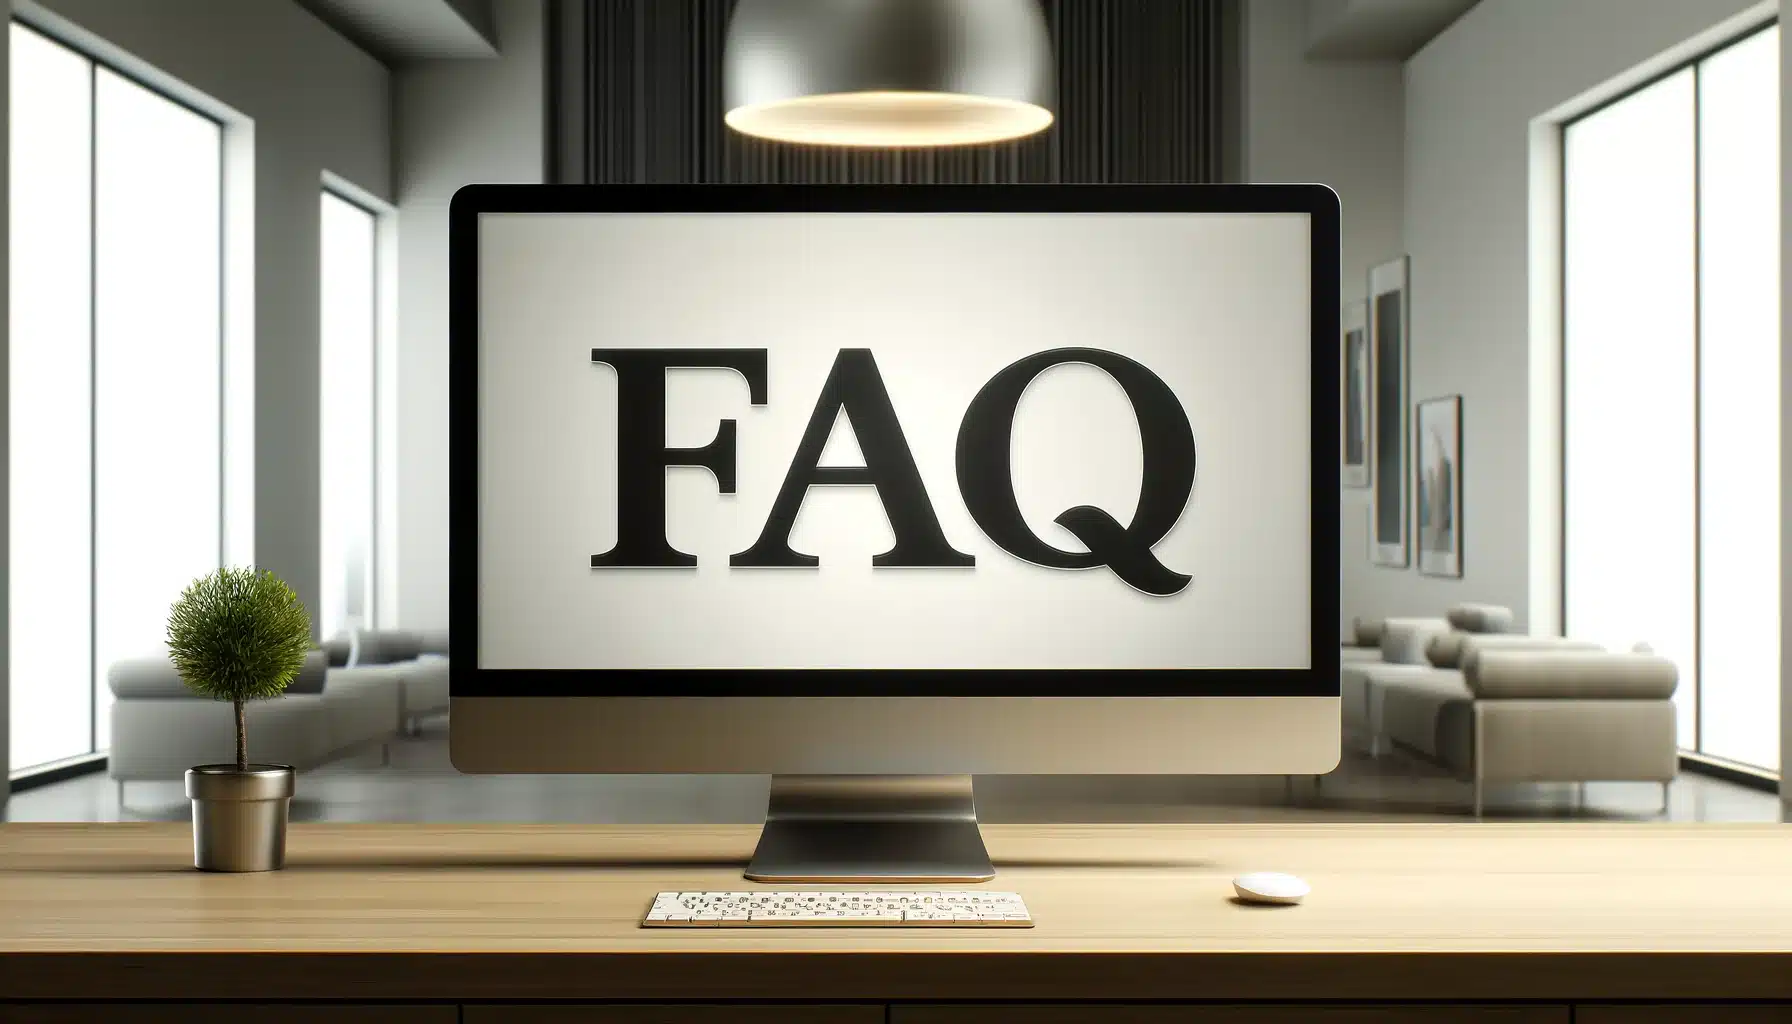 A desktop computer screen prominently displaying the text 'FAQ' in a minimalist, well-lit office setting, concentering on the essence of frequently asked questions in a digital and accessible format.